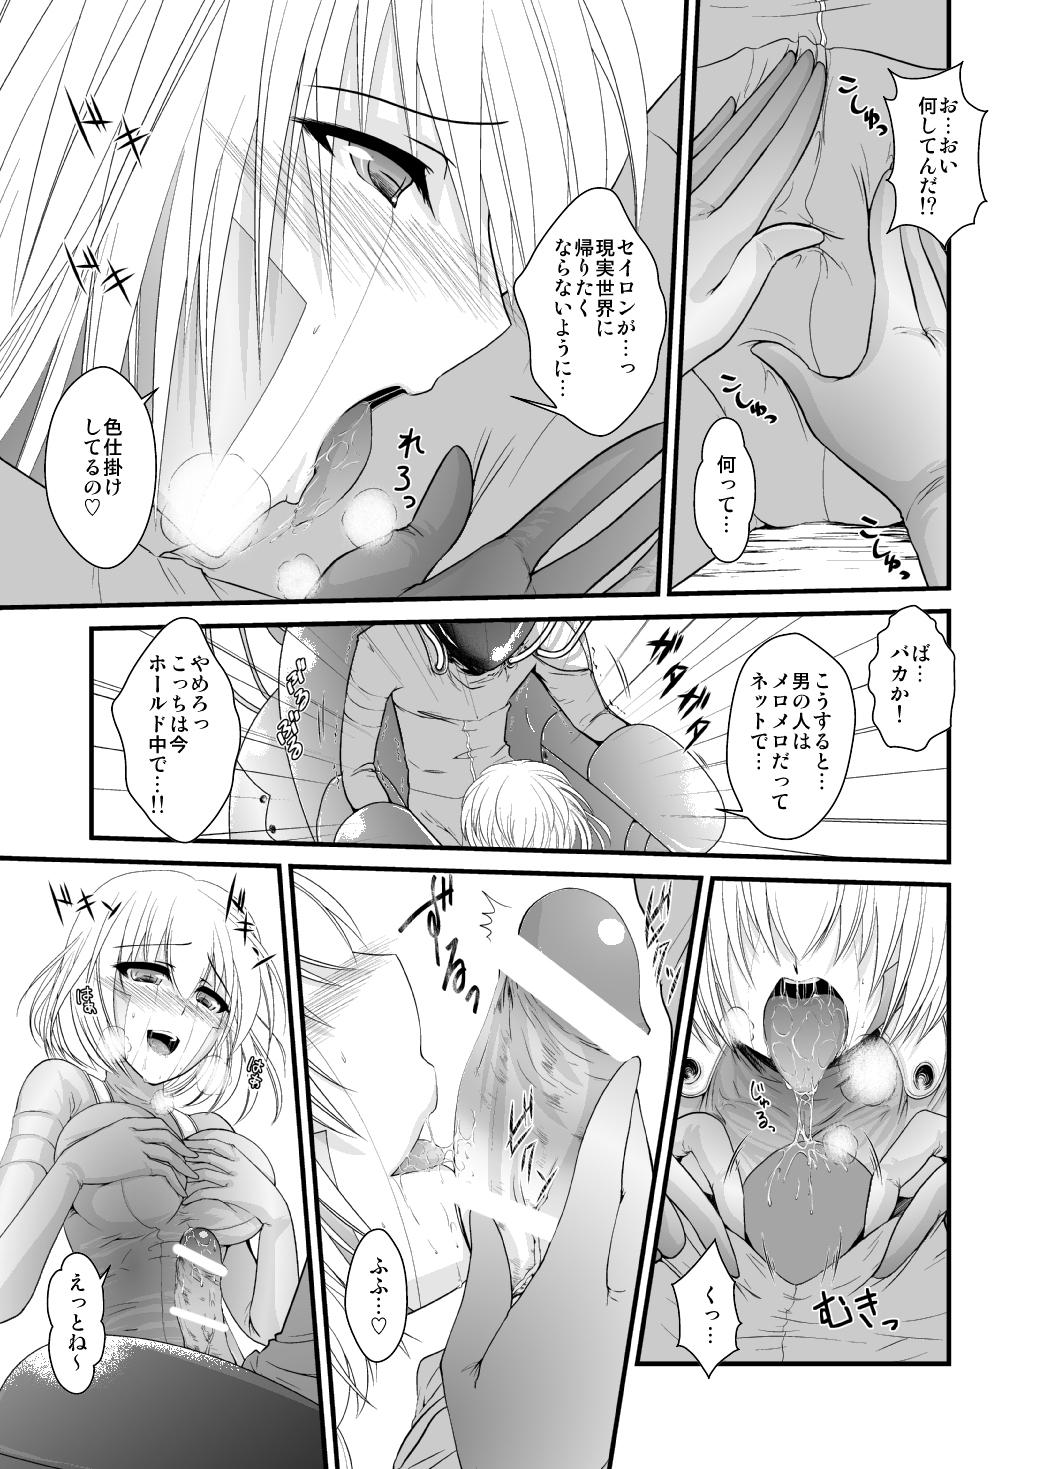 Gostoso アルゴリズム Creampies - Page 9